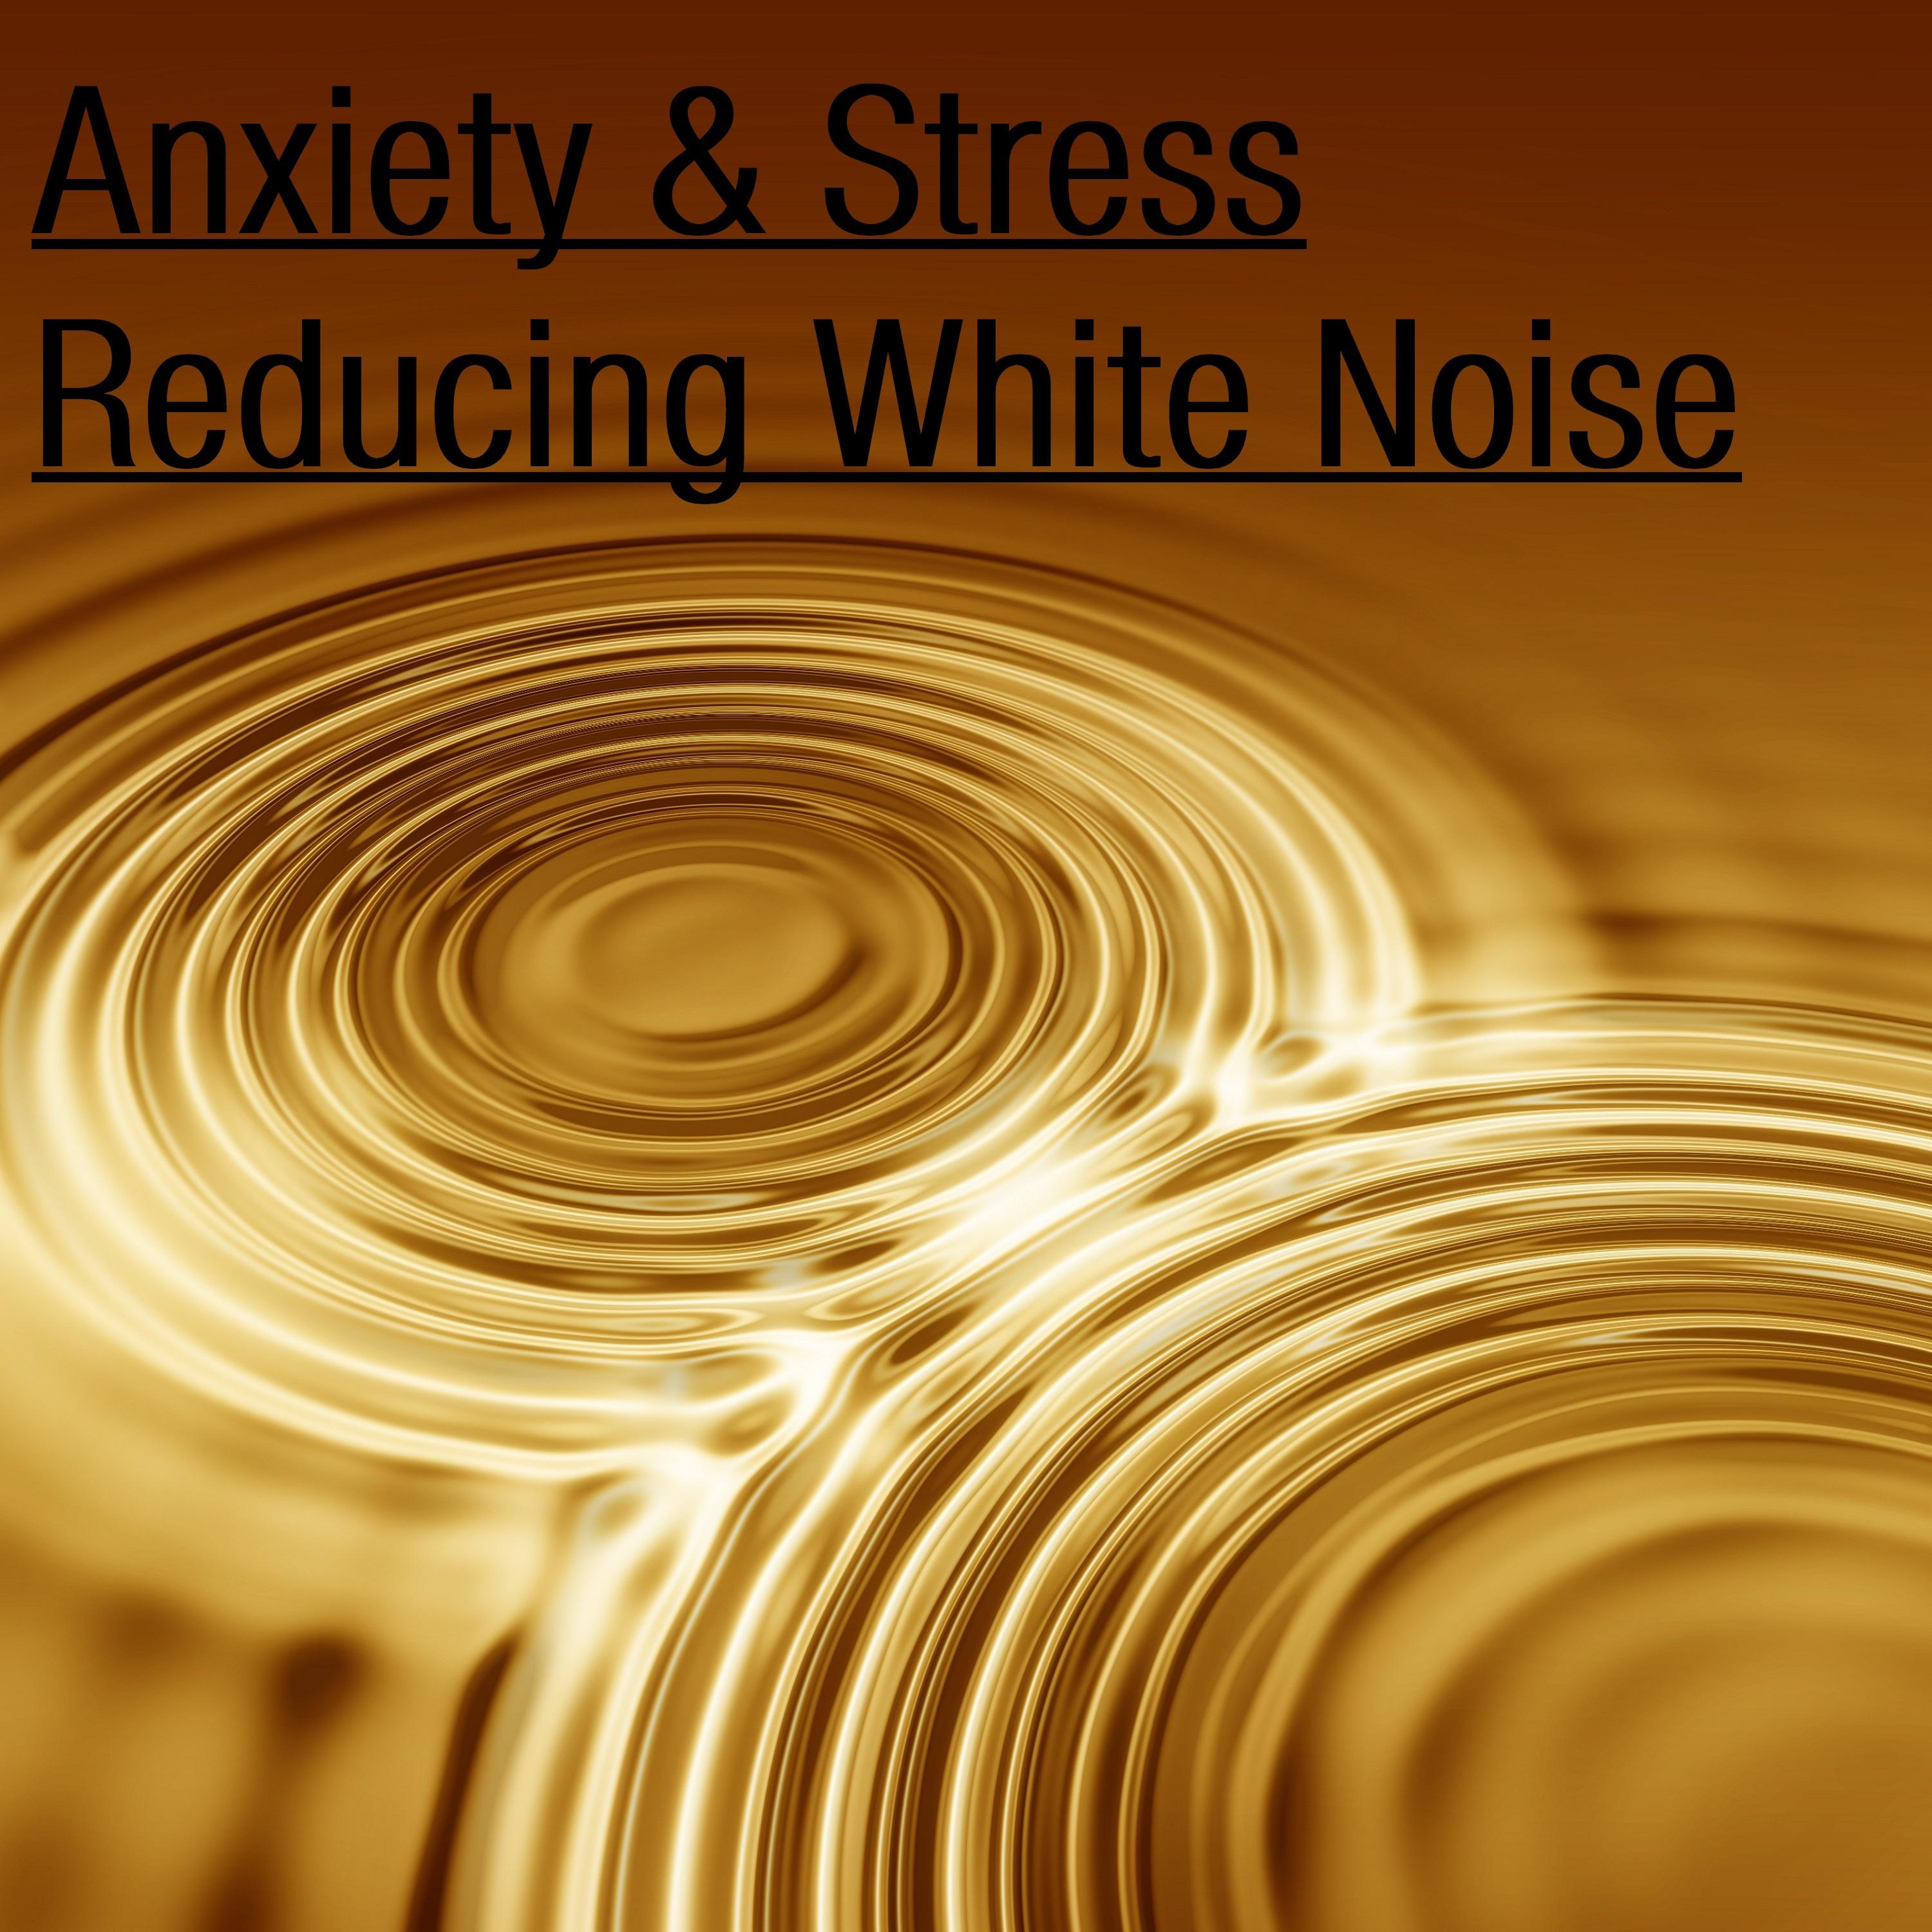 16 Anxiety and Stress Reducing Natural White Noise Sounds